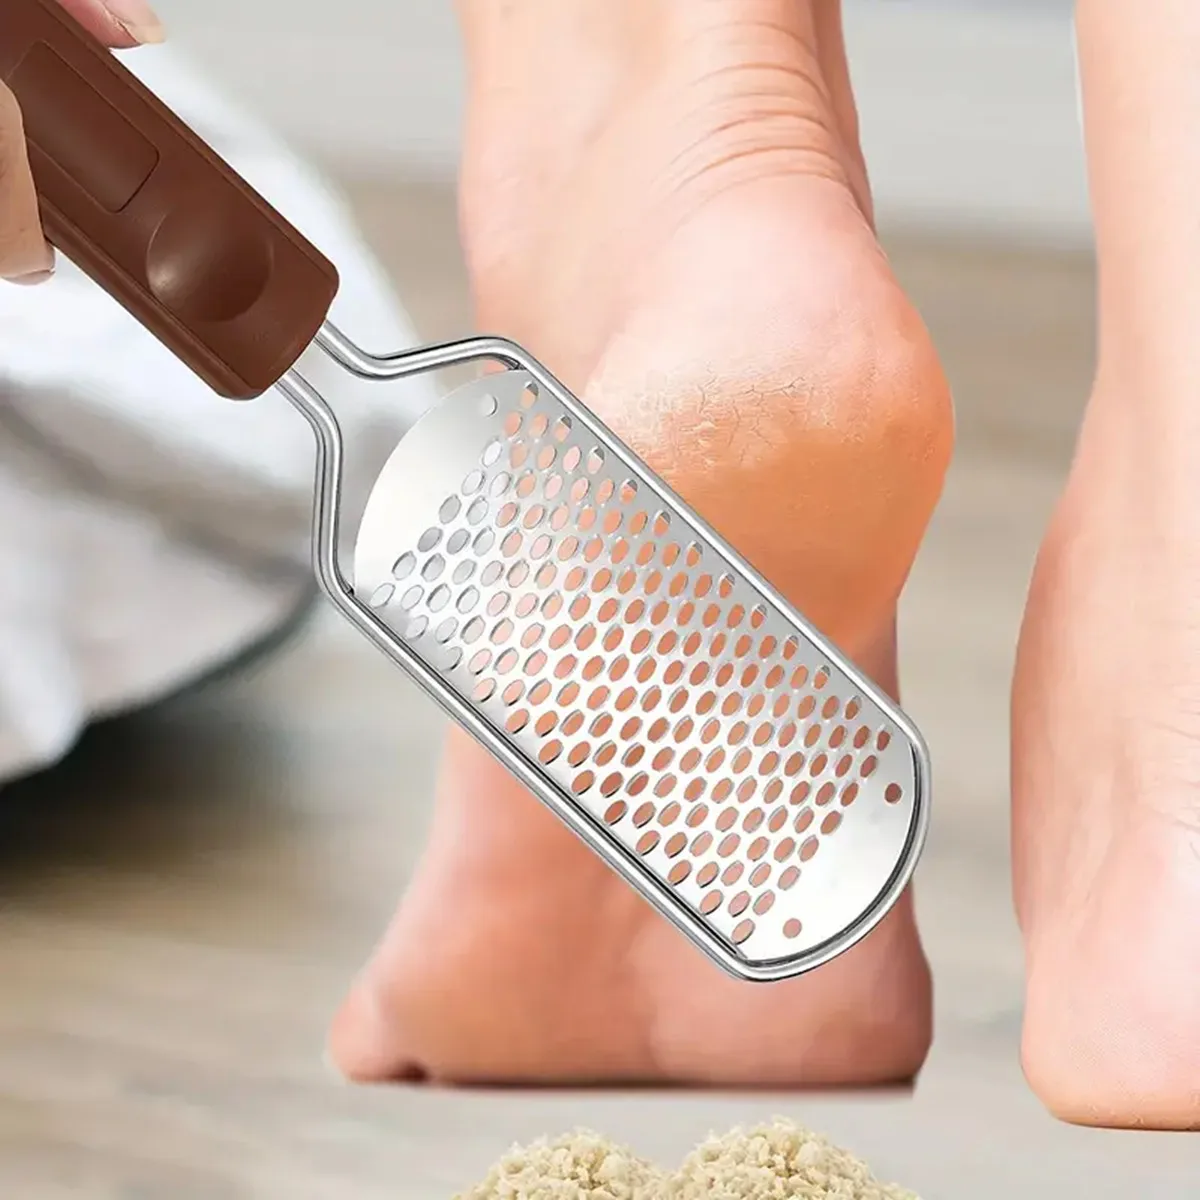 new stainless steel portable rasp pedicure foot file callus remover dead skin foot scraper foot grater scrubber for wet dry Foot File Foot Scrubber Pedicure - Callus Remover for Feet Professional Foot Grater Rasp Foot Scraper Corns Callous Removers Dry